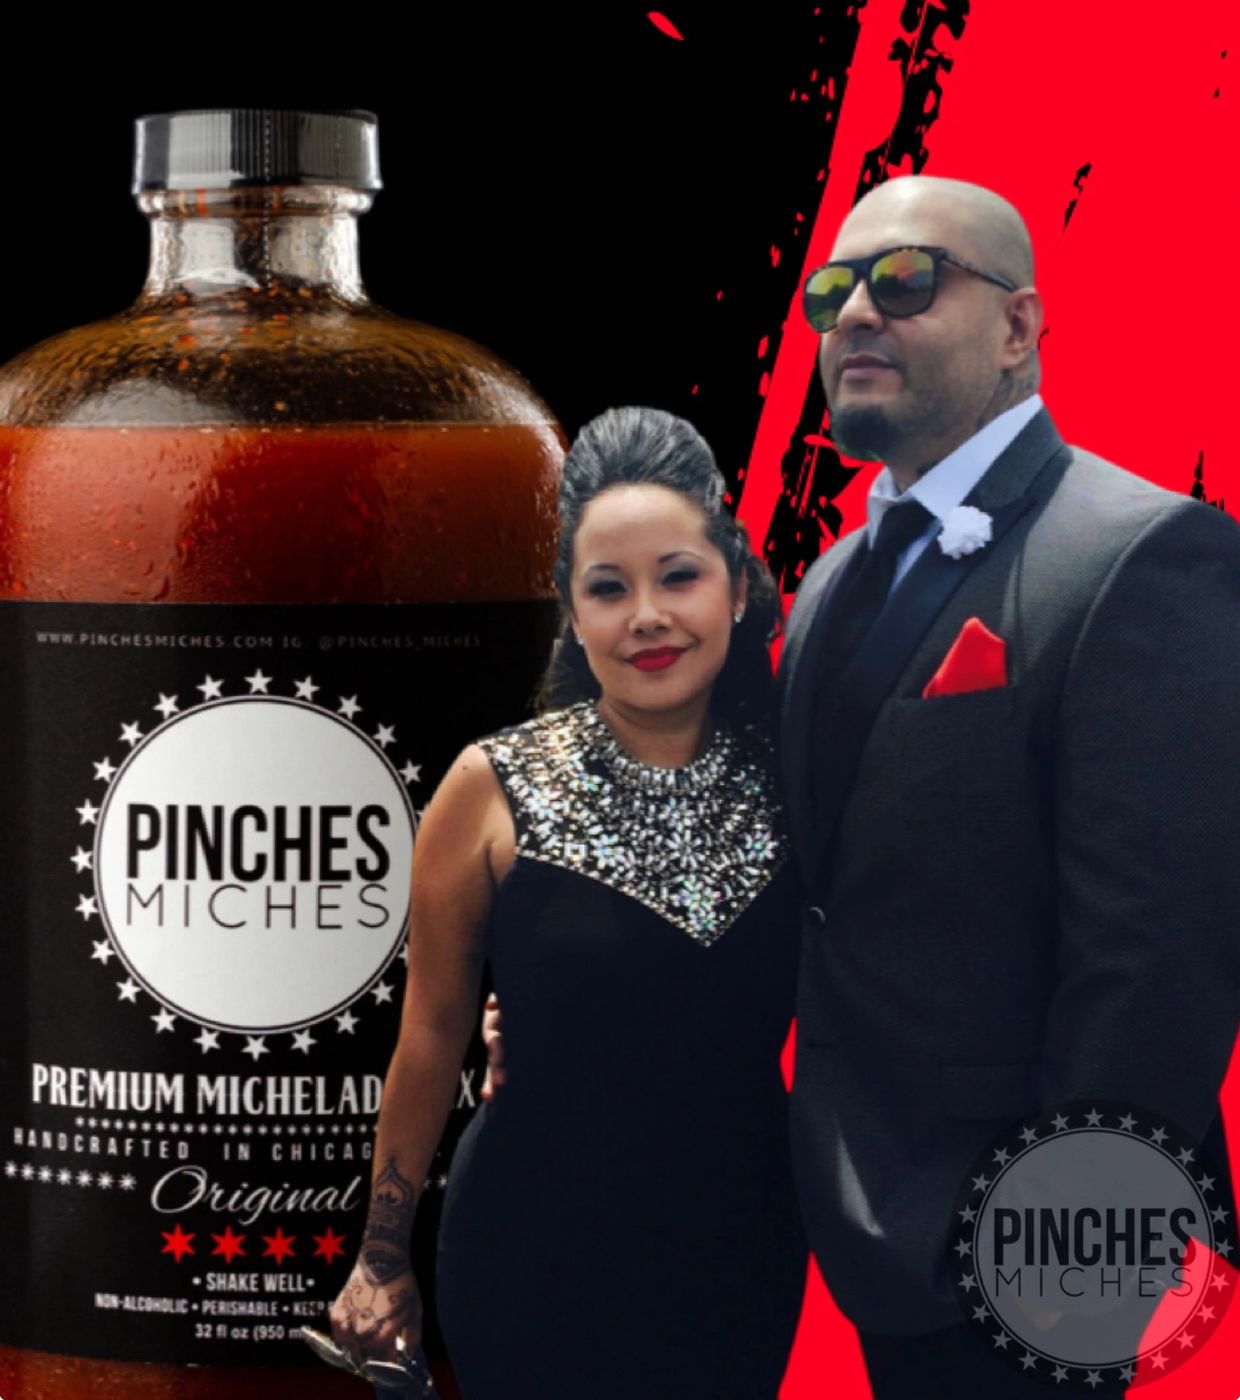 Pinches Miches owners CEO co-founders